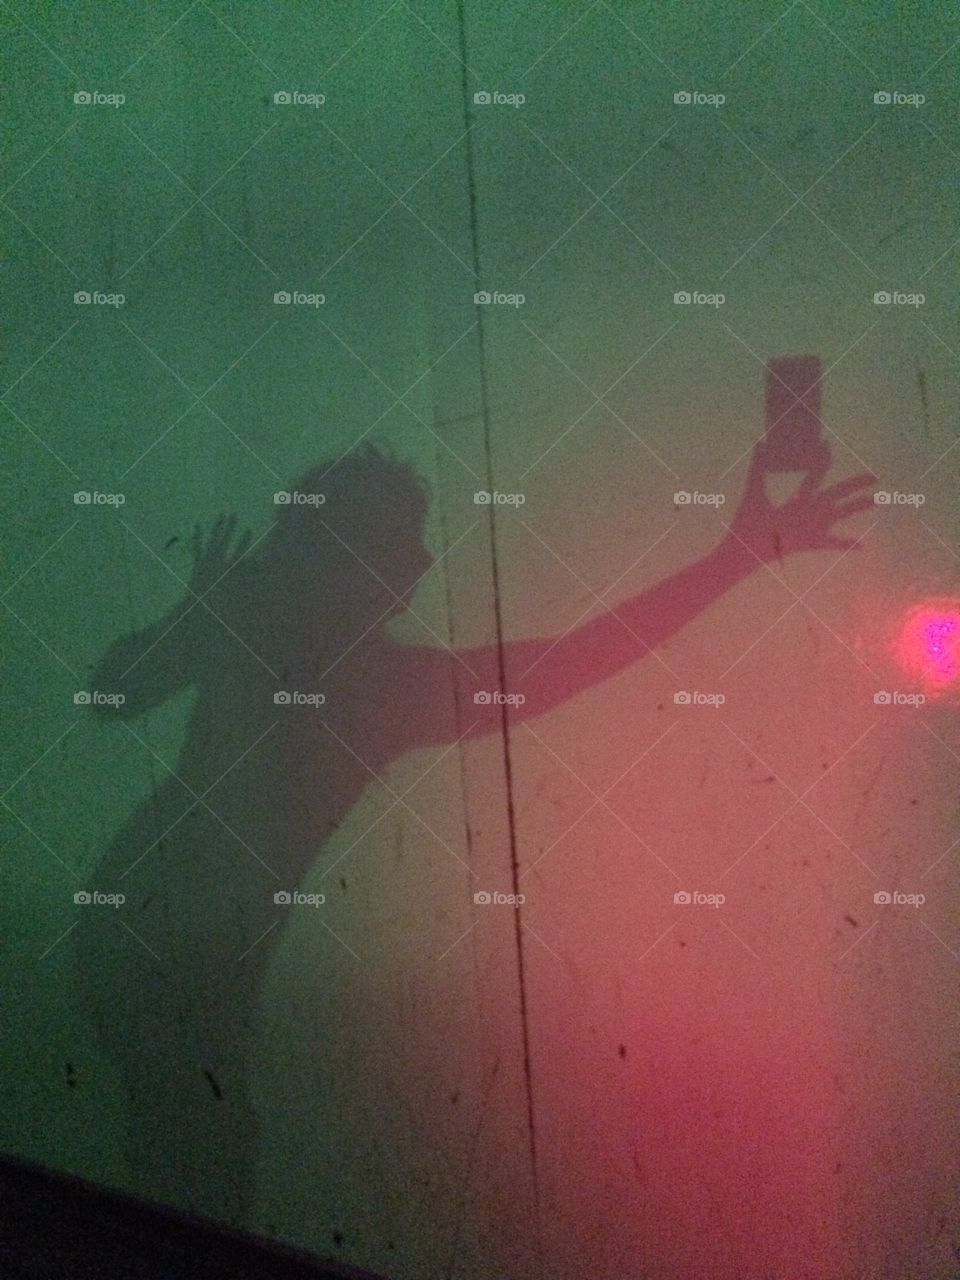 Shadow image of a person holding a smart phone. 